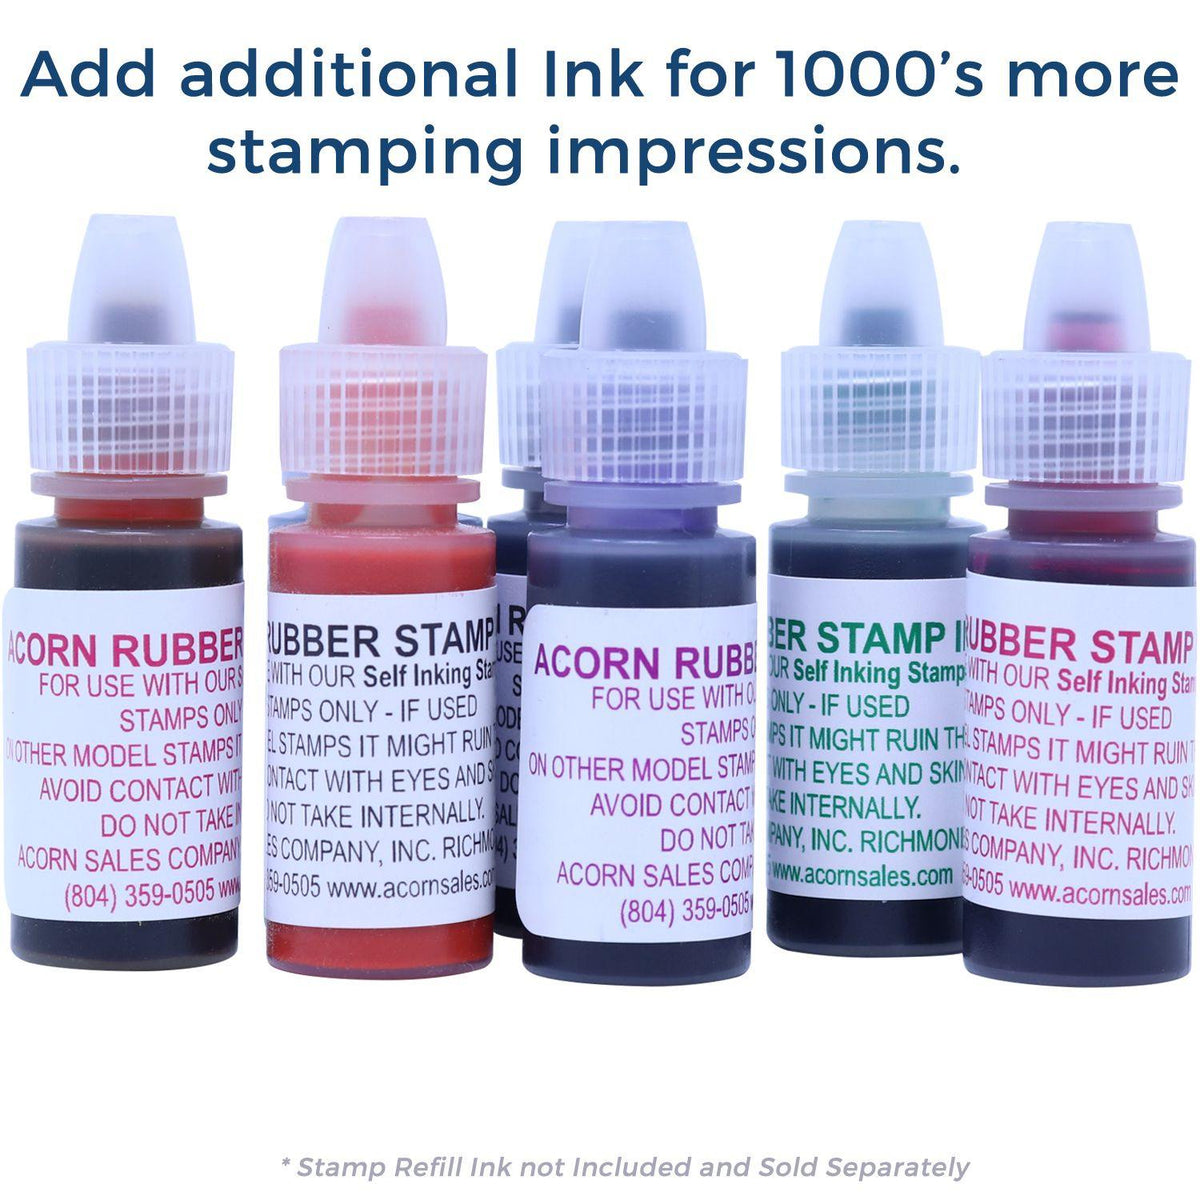 Refill Inks for Slim Pre-Inked Economy Rate Stamp Available